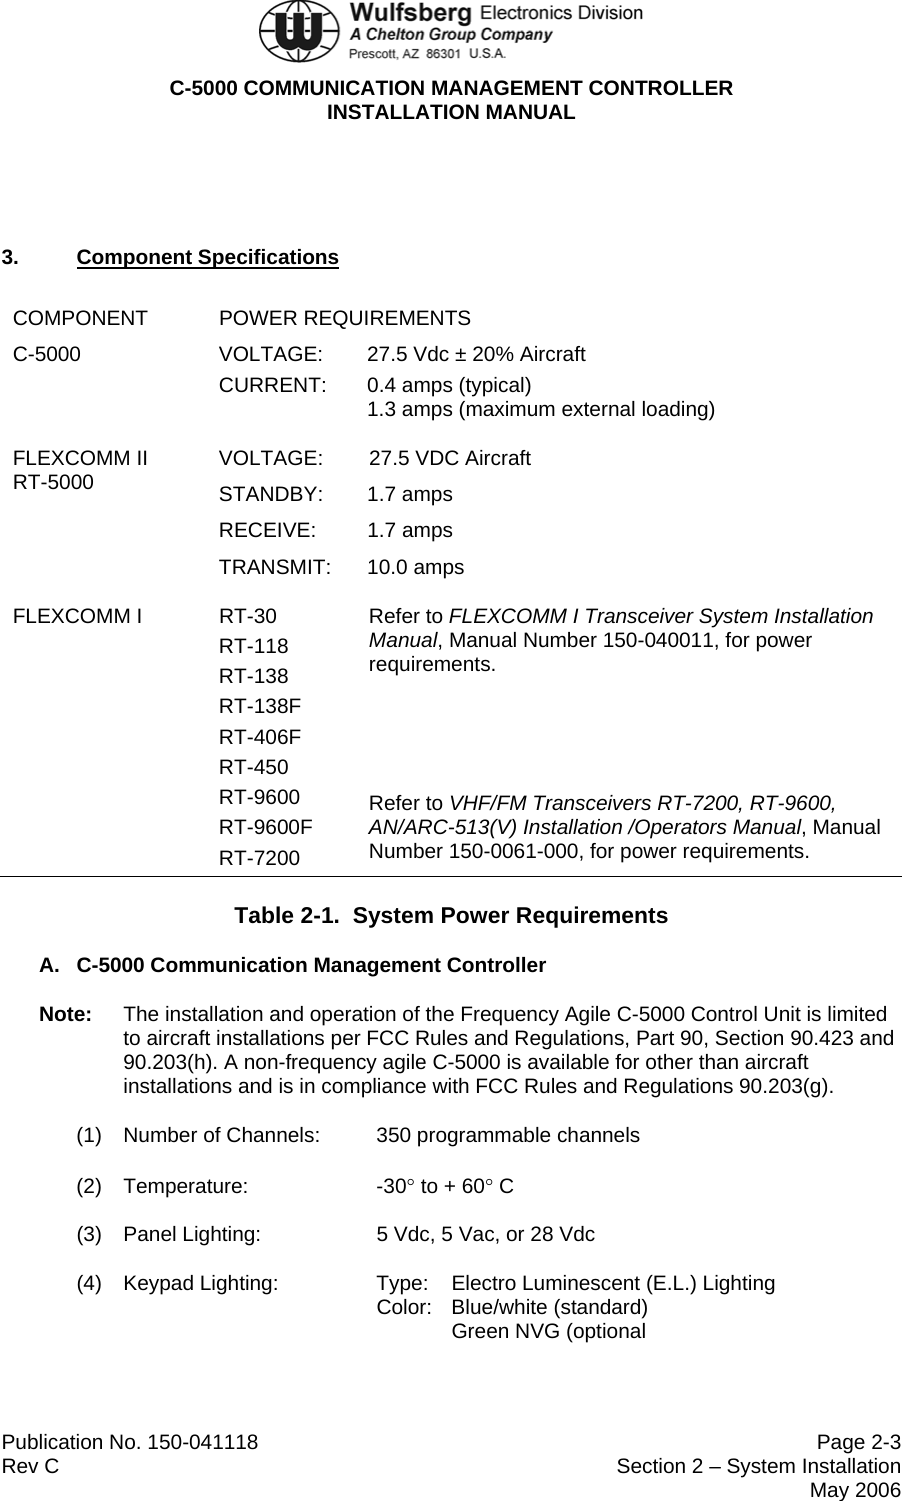  C-5000 COMMUNICATION MANAGEMENT CONTROLLER INSTALLATION MANUAL  Publication No. 150-041118  Page 2-3 Rev C  Section 2 – System Installation  May 2006  3.  Component Specifications COMPONENT POWER REQUIREMENTS C-5000  VOLTAGE:  27.5 Vdc ± 20% Aircraft CURRENT: 0.4 amps (typical) 1.3 amps (maximum external loading) FLEXCOMM II RT-5000  VOLTAGE:  27.5 VDC Aircraft STANDBY:  1.7 amps  RECEIVE: 1.7 amps TRANSMIT: 10.0 amps FLEXCOMM I  RT-30 RT-118 RT-138 RT-138F RT-406F RT-450 RT-9600 RT-9600F RT-7200 Refer to FLEXCOMM I Transceiver System Installation Manual, Manual Number 150-040011, for power requirements.    Refer to VHF/FM Transceivers RT-7200, RT-9600, AN/ARC-513(V) Installation /Operators Manual, Manual Number 150-0061-000, for power requirements. Table 2-1.  System Power Requirements A.  C-5000 Communication Management Controller Note:  The installation and operation of the Frequency Agile C-5000 Control Unit is limited to aircraft installations per FCC Rules and Regulations, Part 90, Section 90.423 and 90.203(h). A non-frequency agile C-5000 is available for other than aircraft installations and is in compliance with FCC Rules and Regulations 90.203(g). (1)  Number of Channels:  350 programmable channels (2) Temperature:    -30° to + 60° C (3)  Panel Lighting:    5 Vdc, 5 Vac, or 28 Vdc (4)  Keypad Lighting:    Type:  Electro Luminescent (E.L.) Lighting Color: Blue/white (standard) Green NVG (optional 